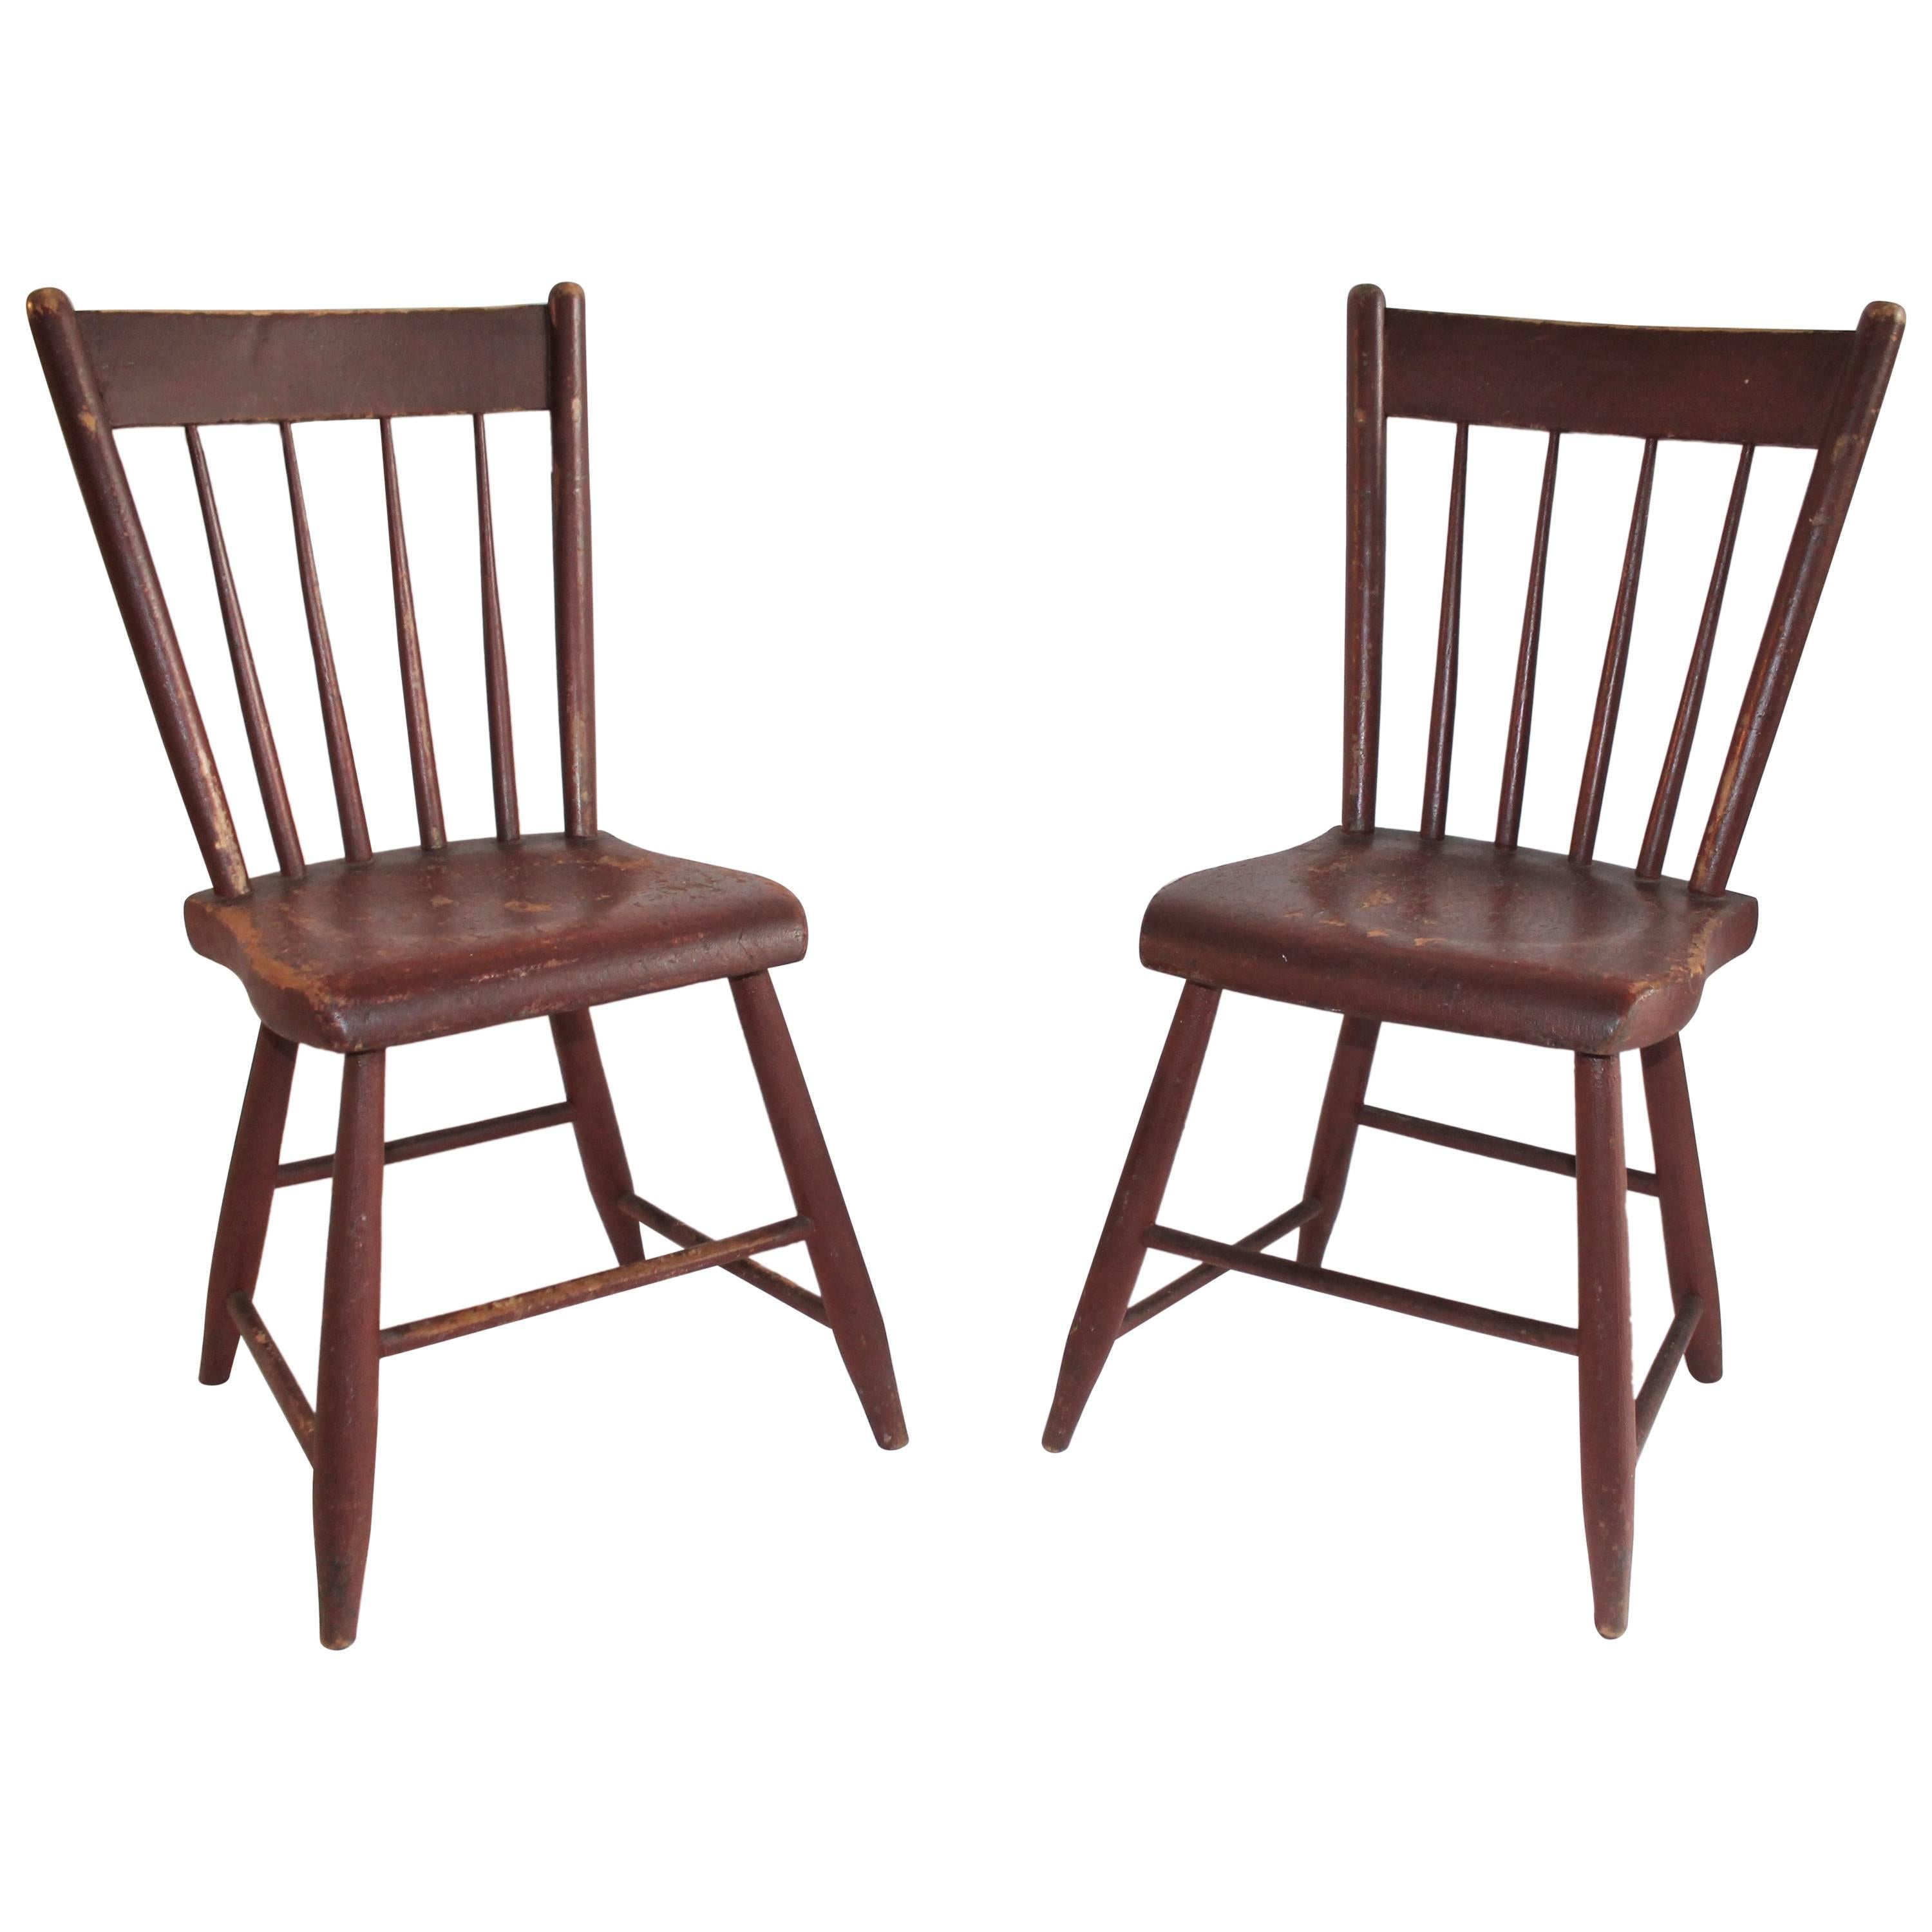 19th Century Original Red Painted Chairs from Pennsylvania, Pair